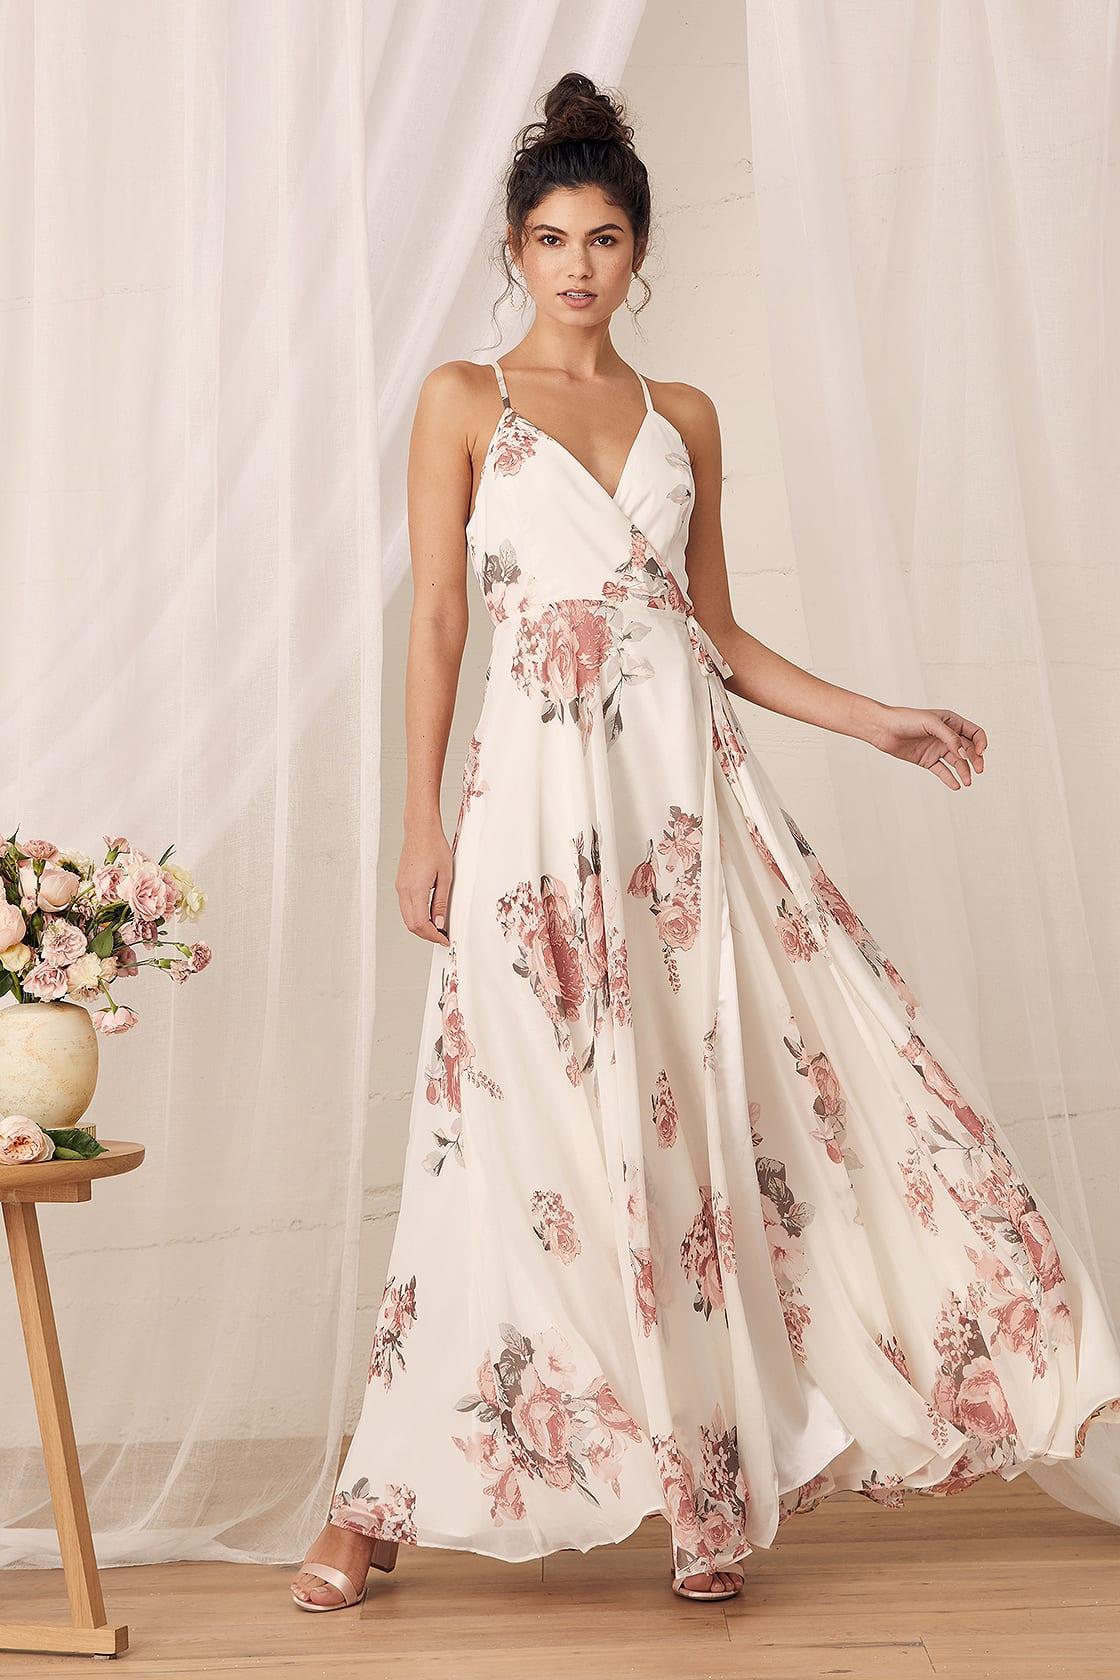 30 Floral Bridesmaid Dresses With the Prettiest Patterns